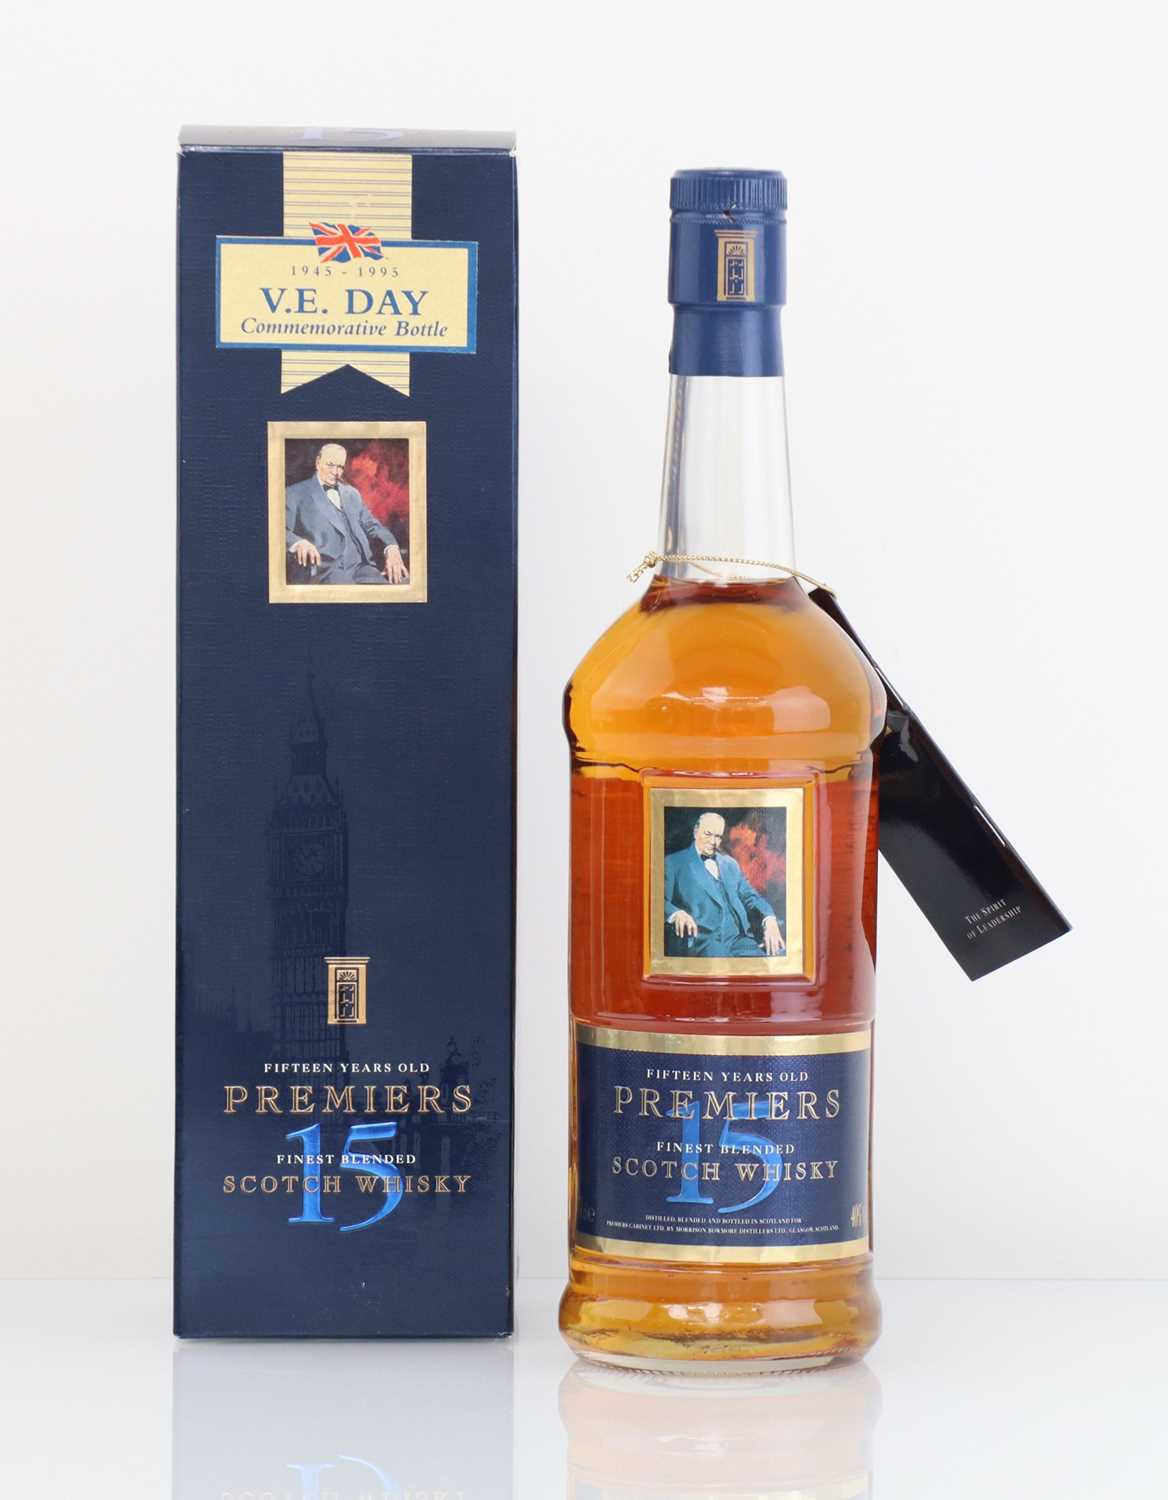 A Premiers V.E. Day Commemorative Winston Churchill 15 year old Blended Scotch Whisky by Morrison